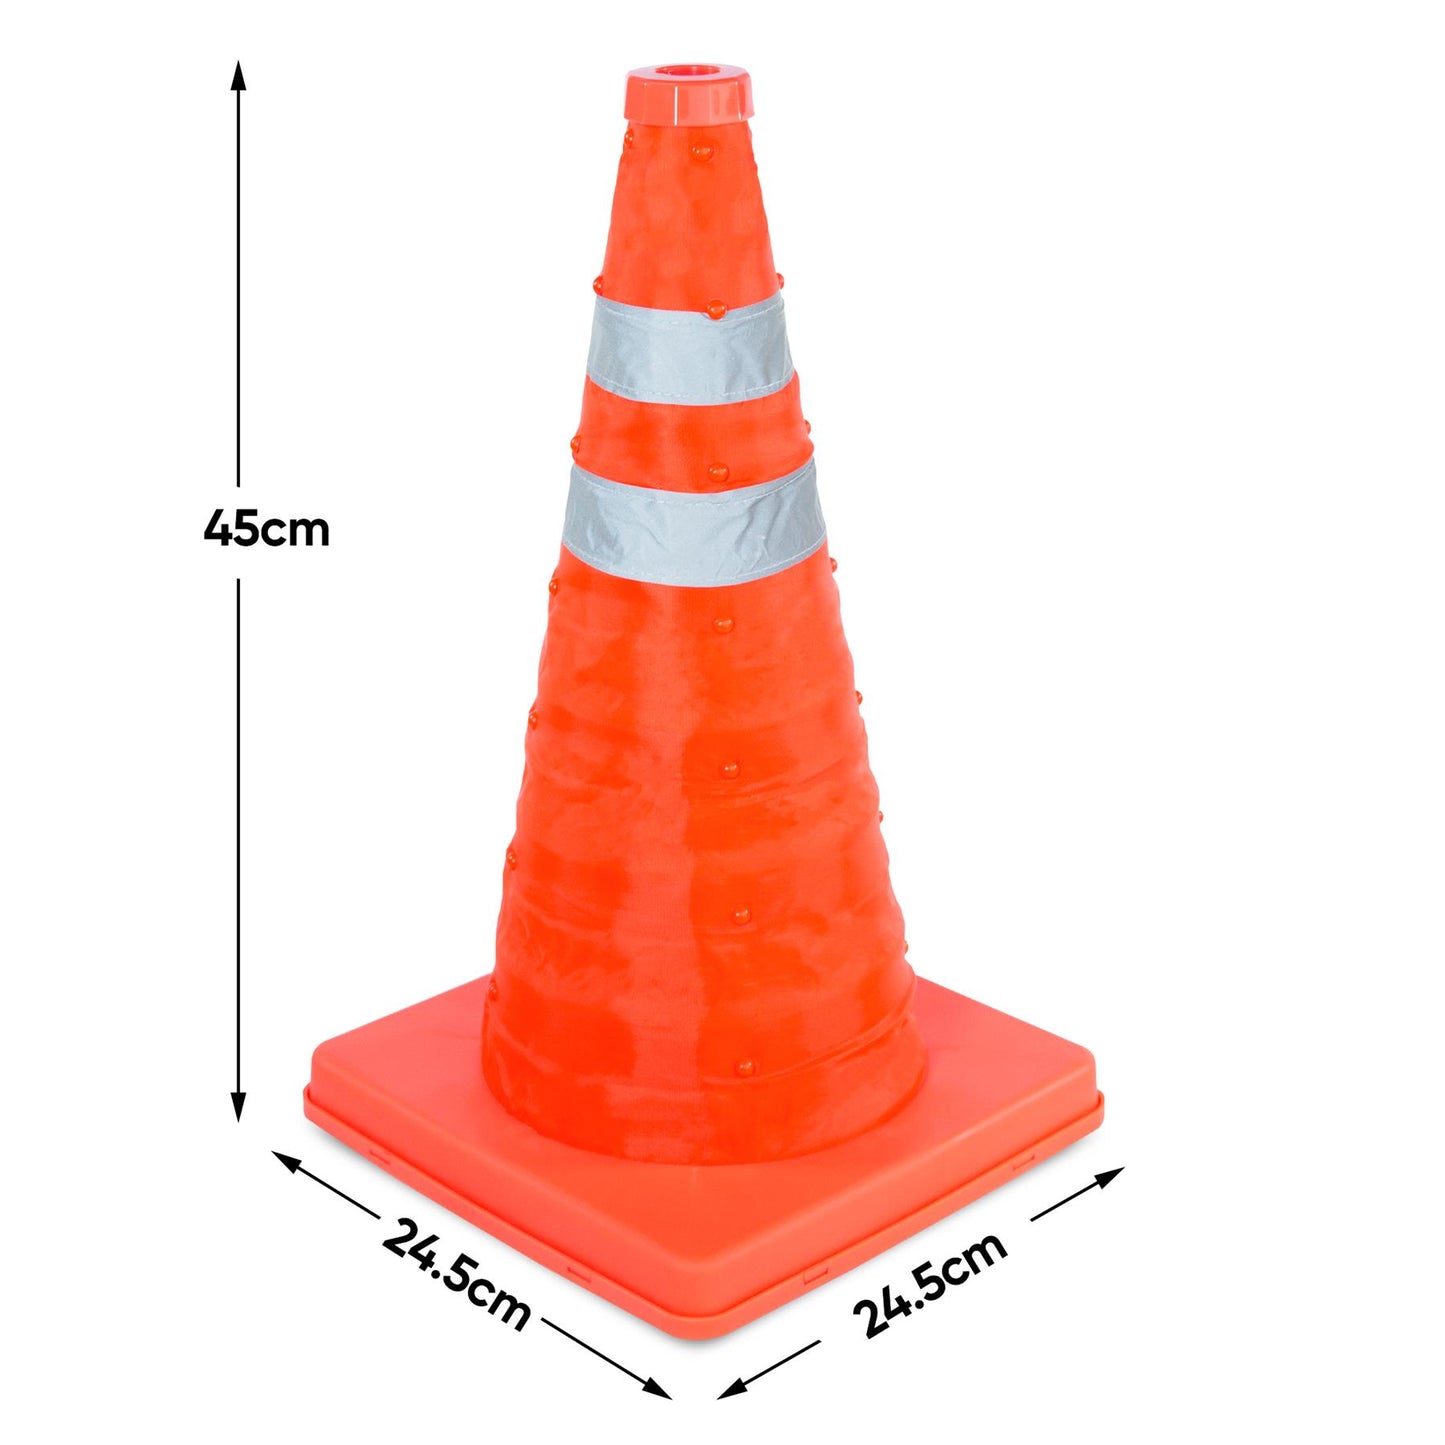 Pop Up Portable High Visibility 18" Safety Cone Emergency Football Traffic